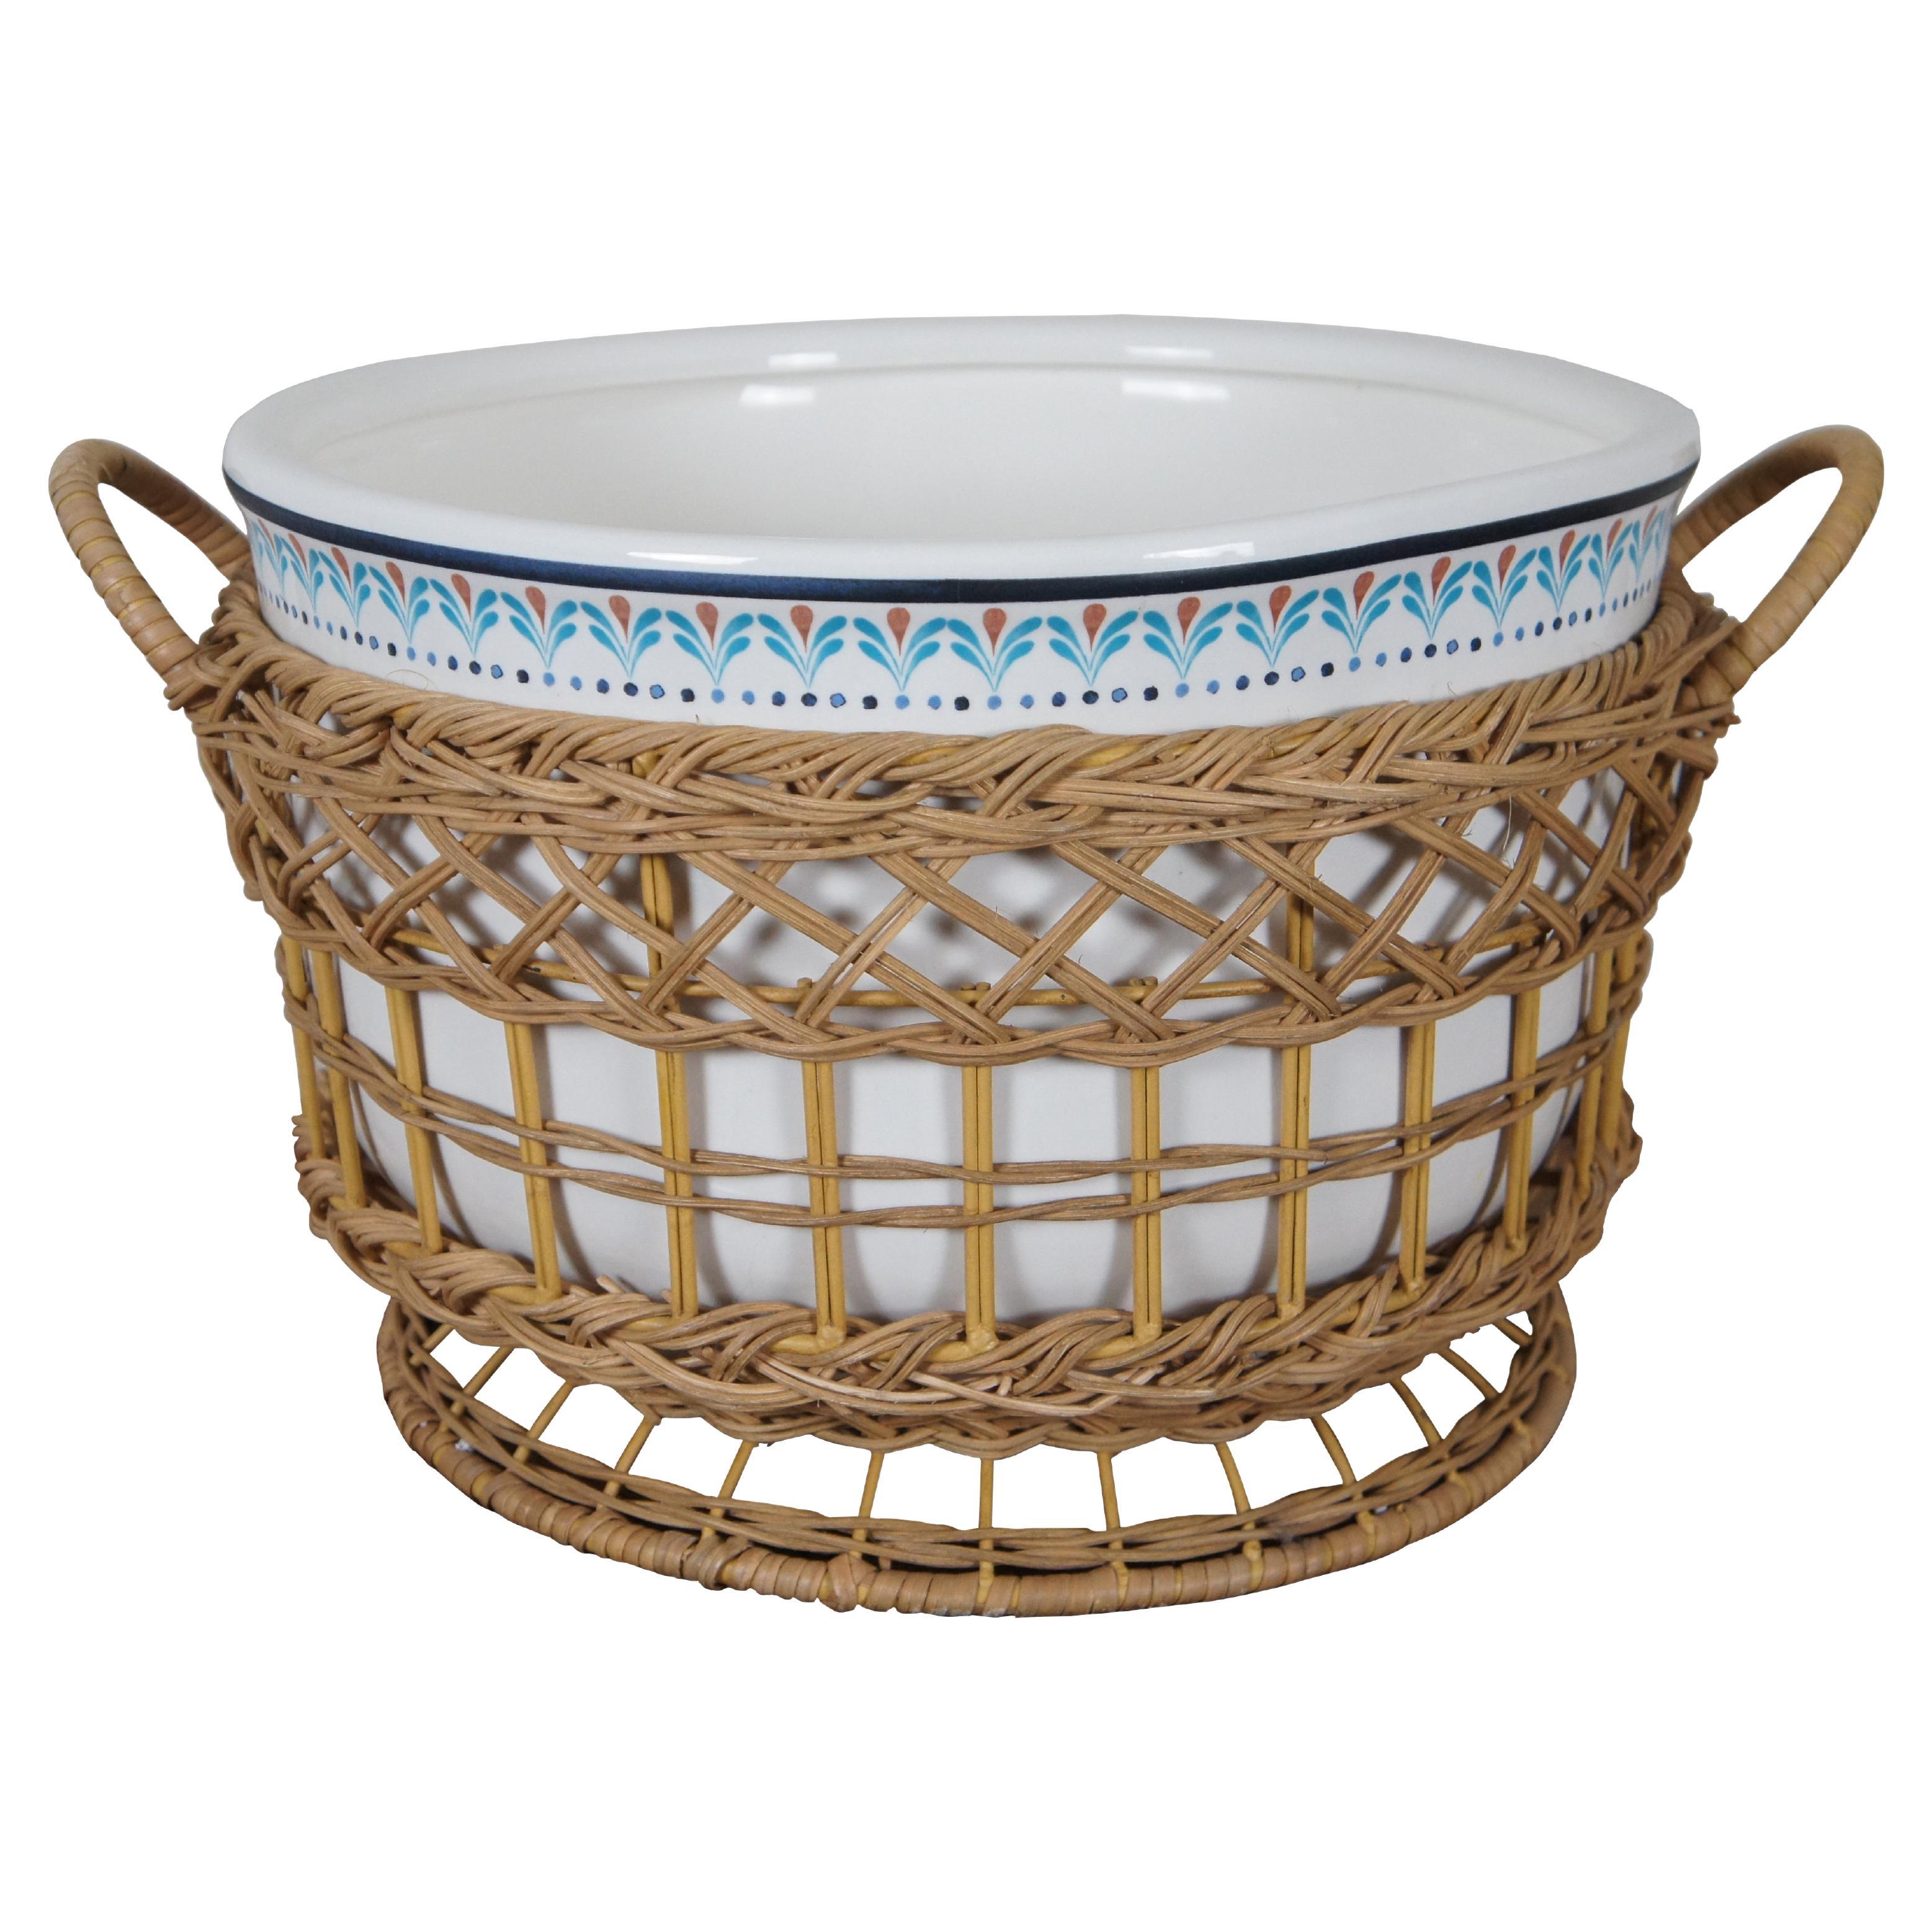 Frontgate Marbella Ceramic Rattan Blue Party Tub Serveware Bowl Beer Ice Bucket For Sale